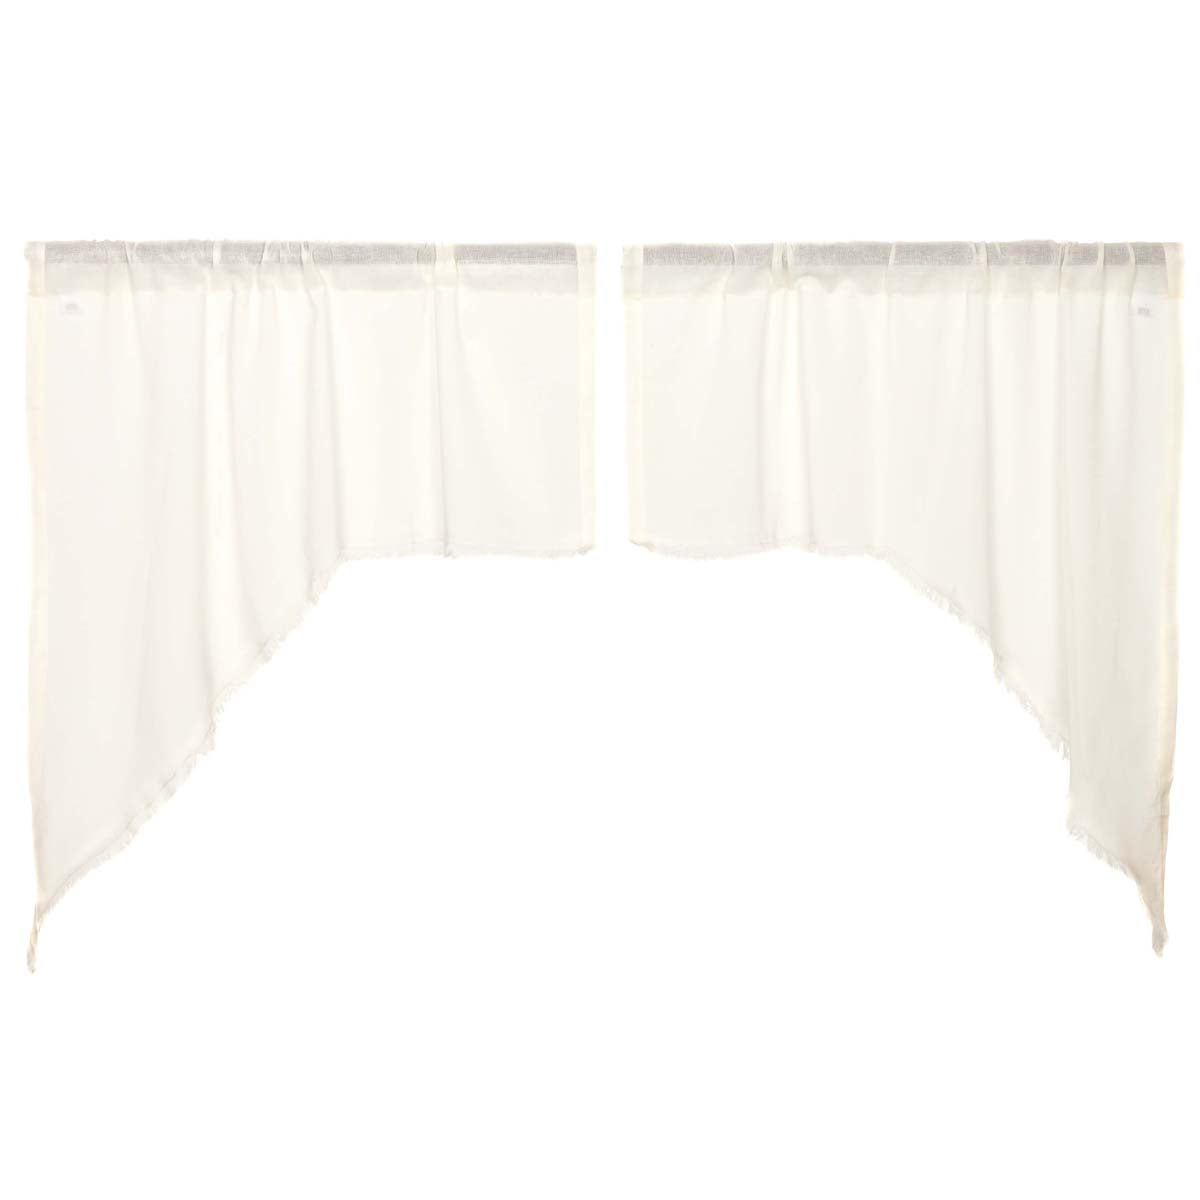 April & Olive Tobacco Cloth Antique White Swag Fringed Set of 2 36x36x16 By VHC Brands